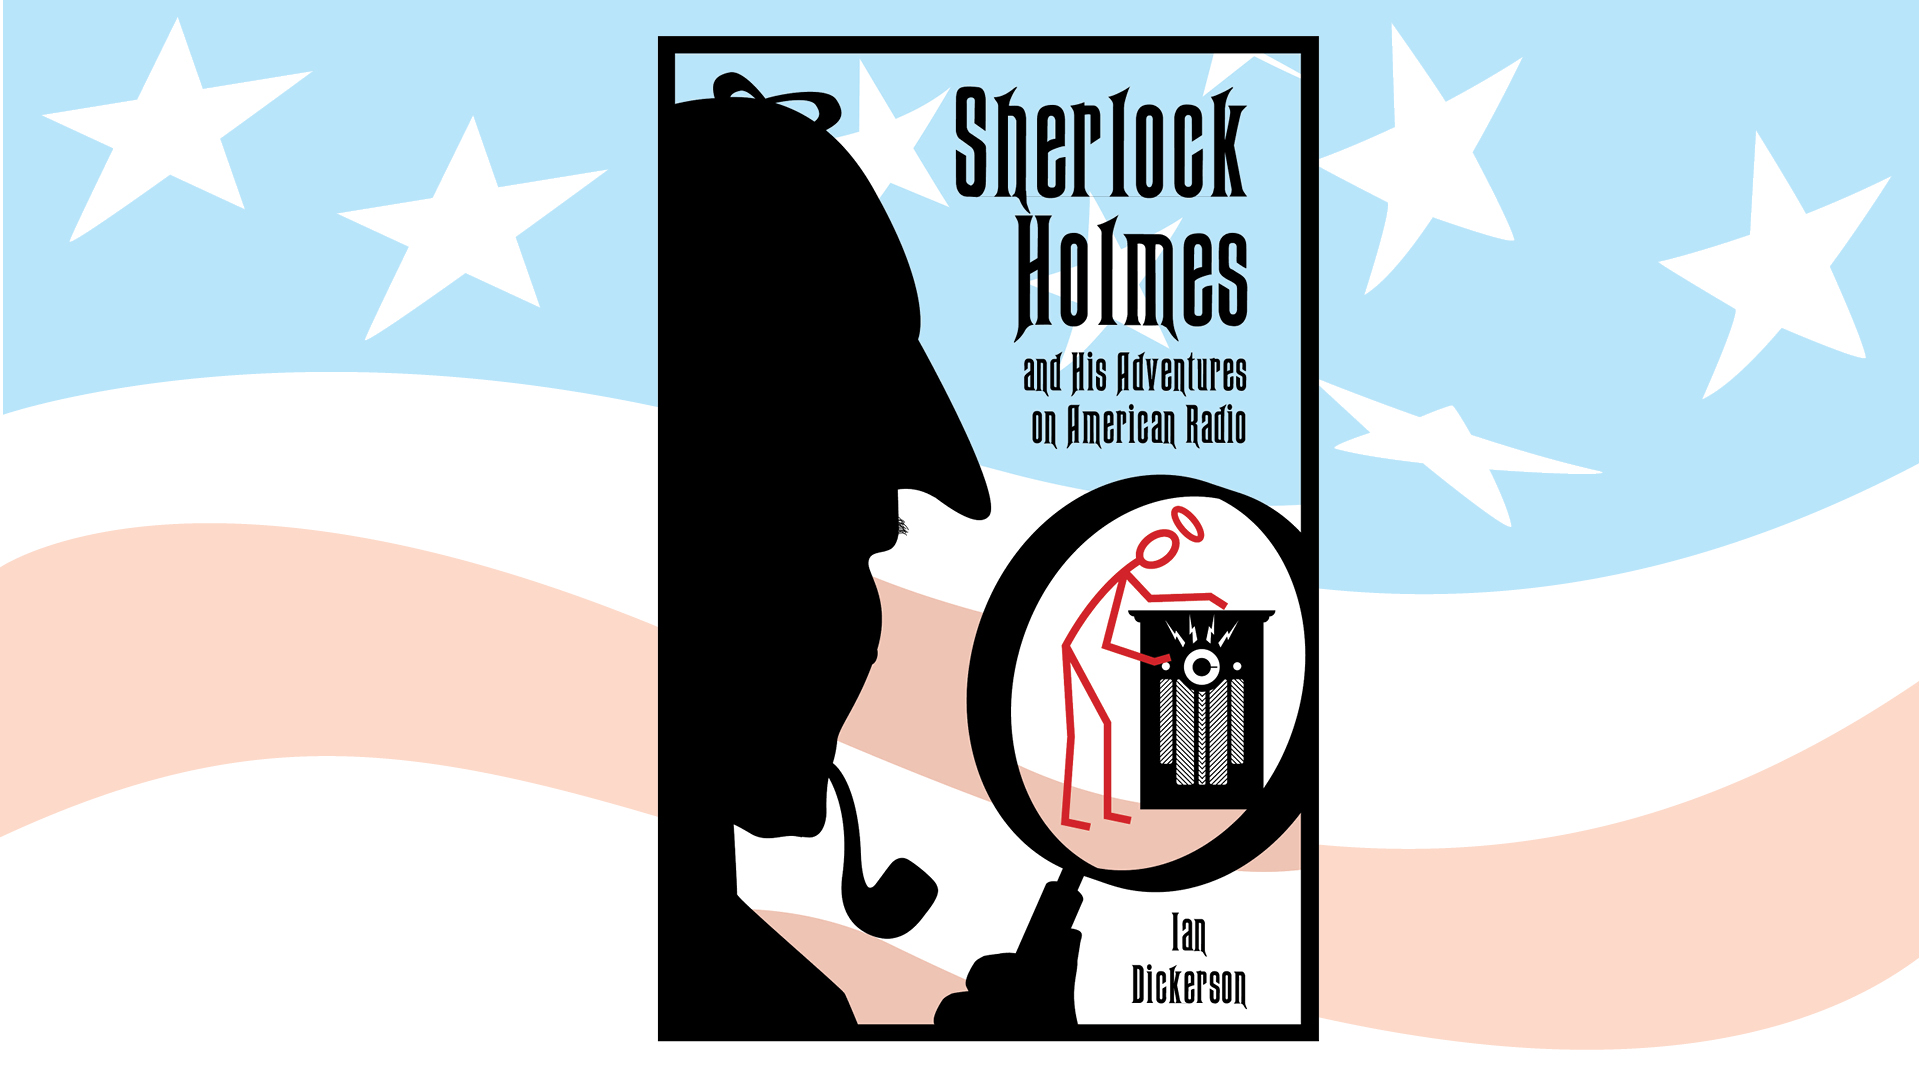 Andrew Howard designed book cover 'Sherlock Holmes And His Adventures On American Radio'